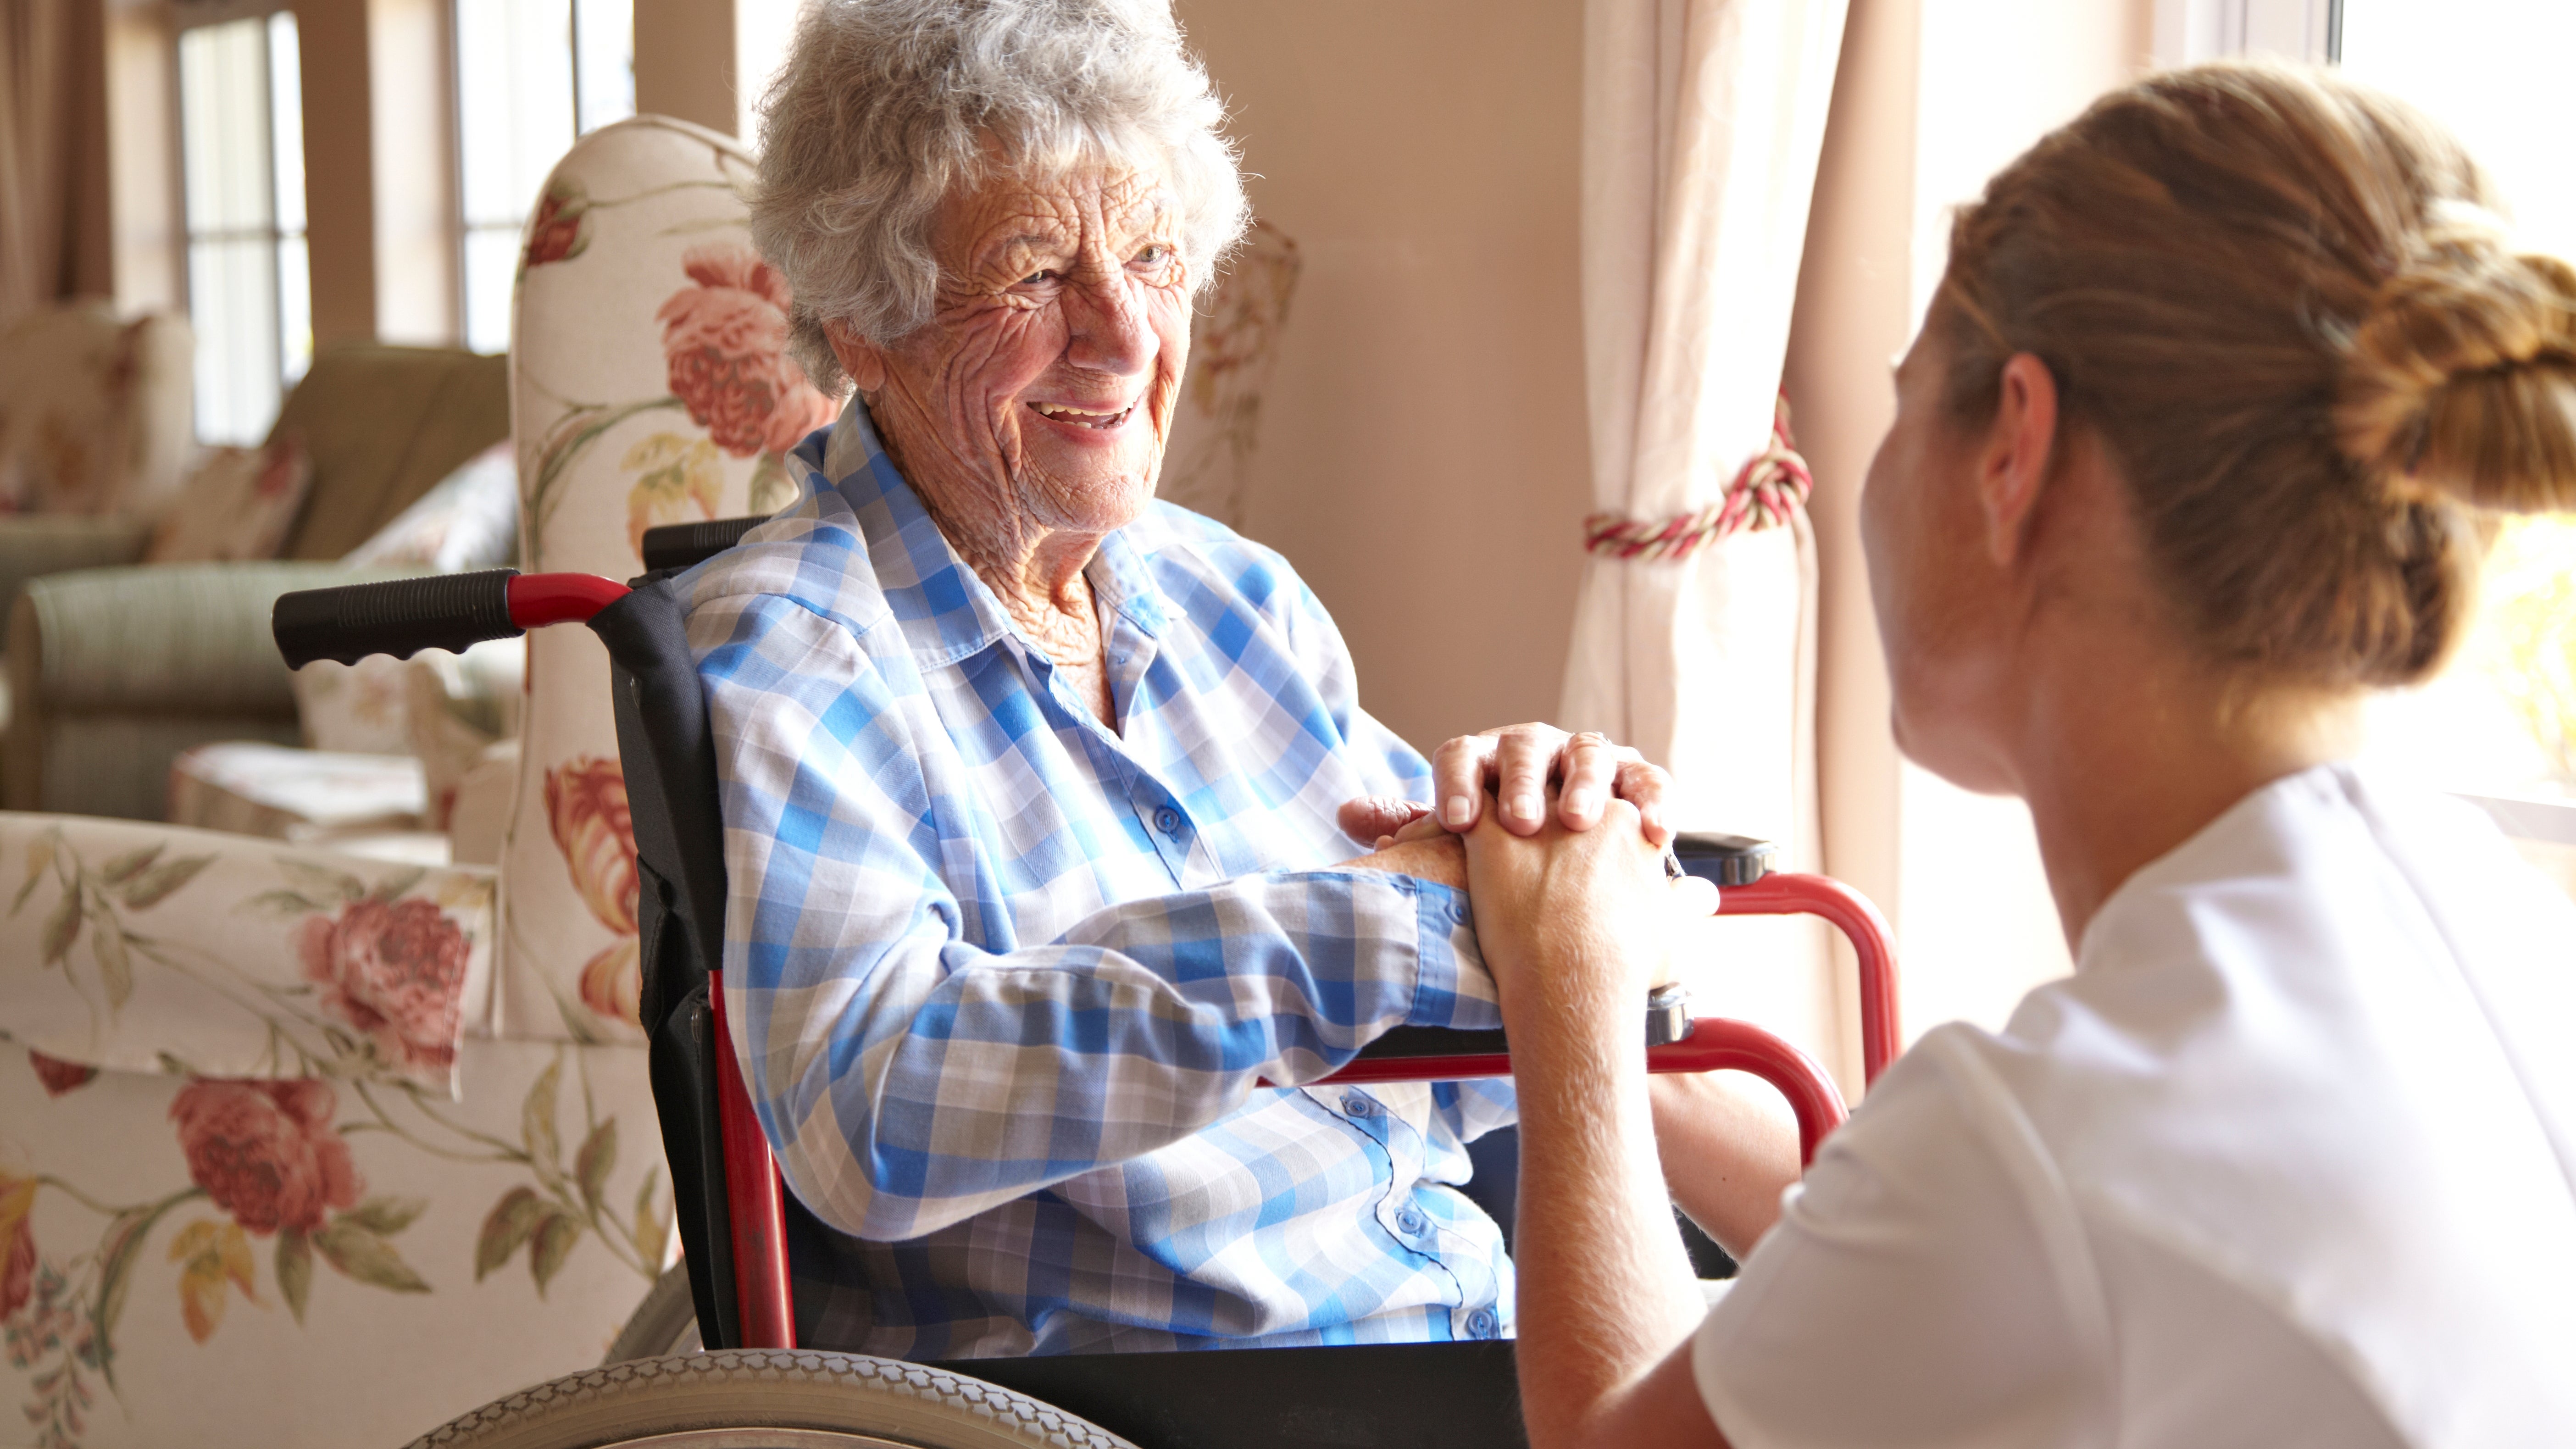 Inspection frequencies: Social care homes